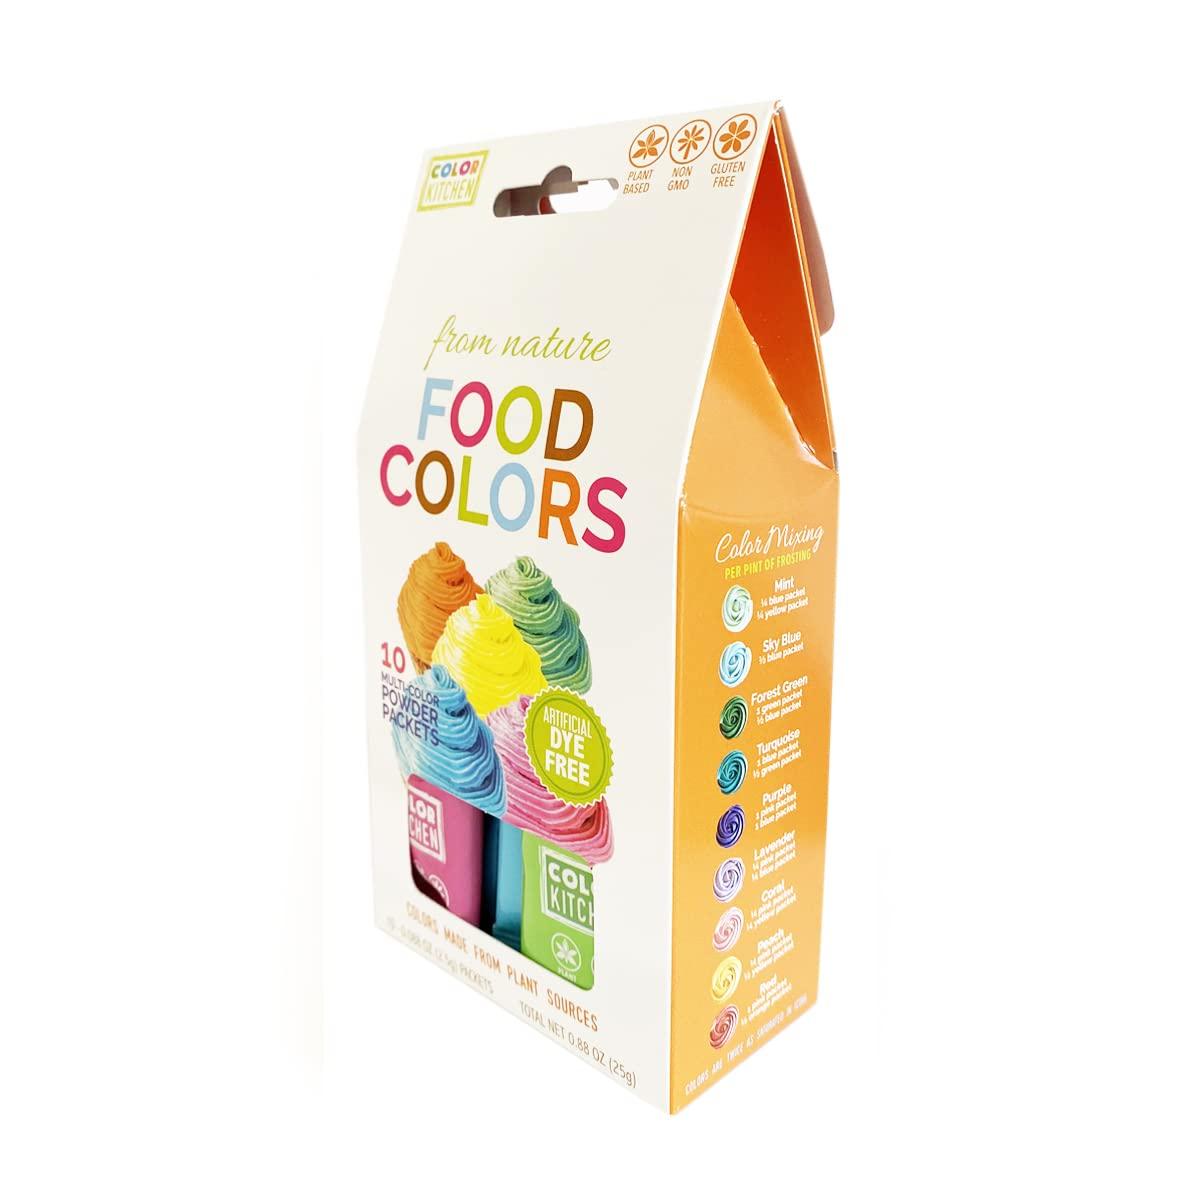  ColorKitchen Food Coloring Multi-Pack (10 Packets-5